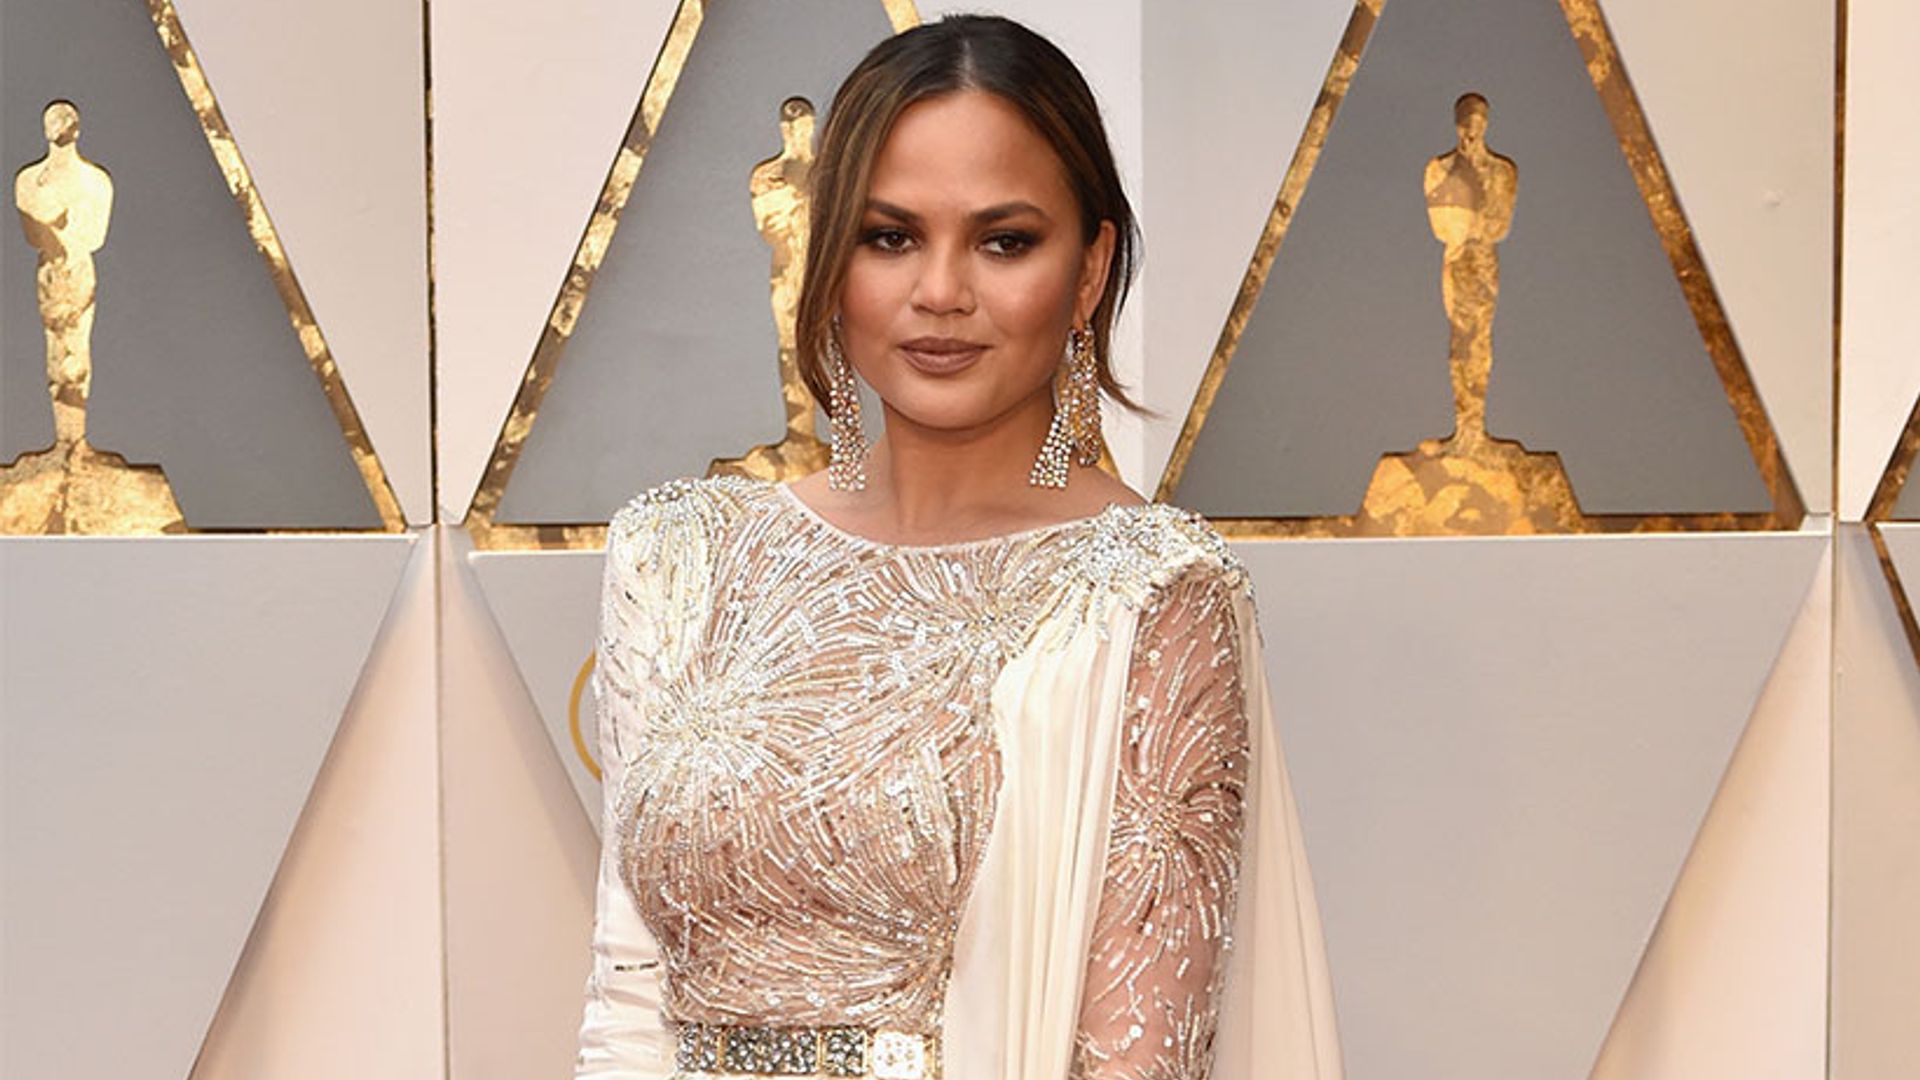 Chrissy Teigen was caught sleeping during the Oscars: check out her hilarious reaction